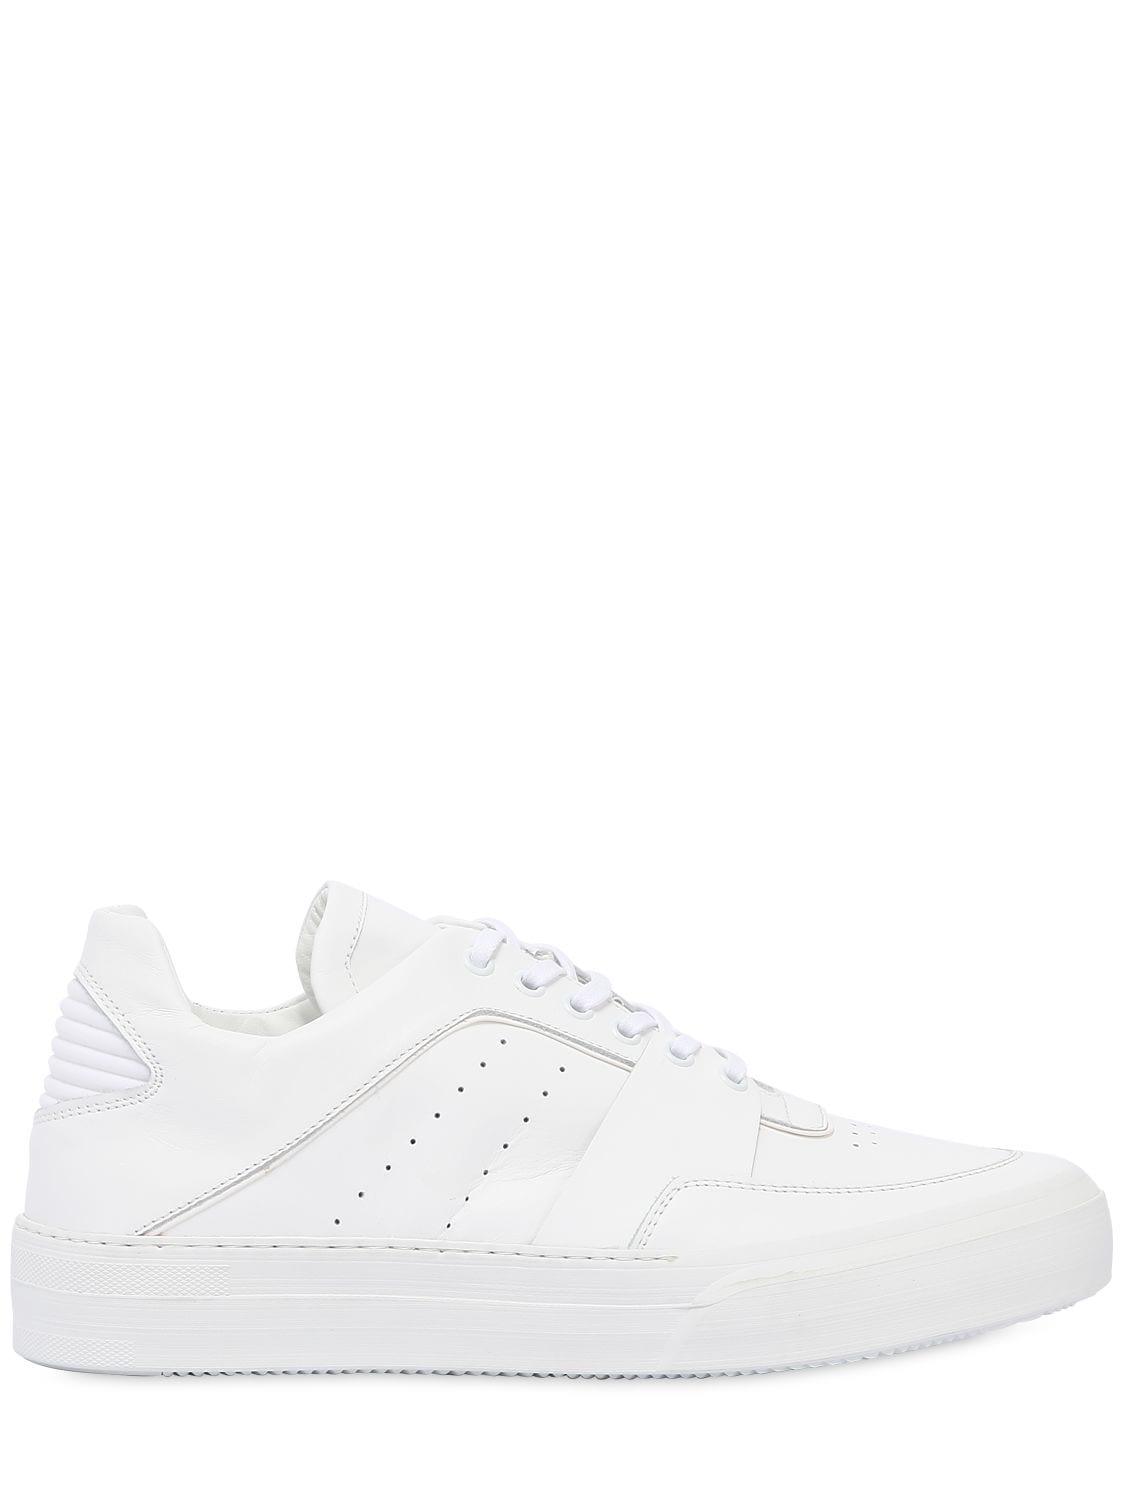 Bikkembergs Arena Platform Leather Trainers In White